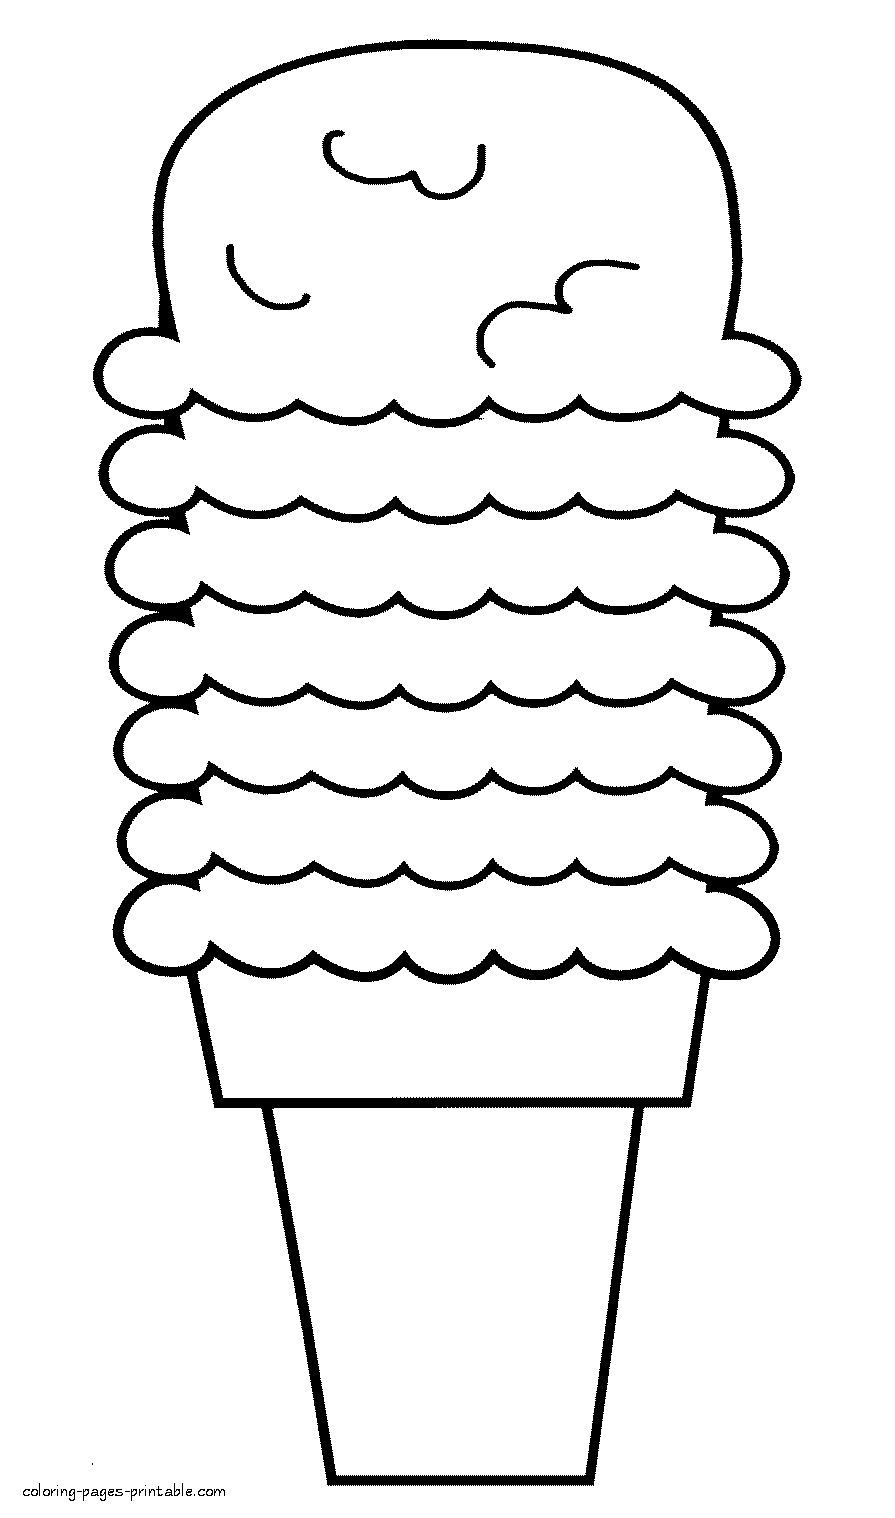 Colouring pages of ice cream for children